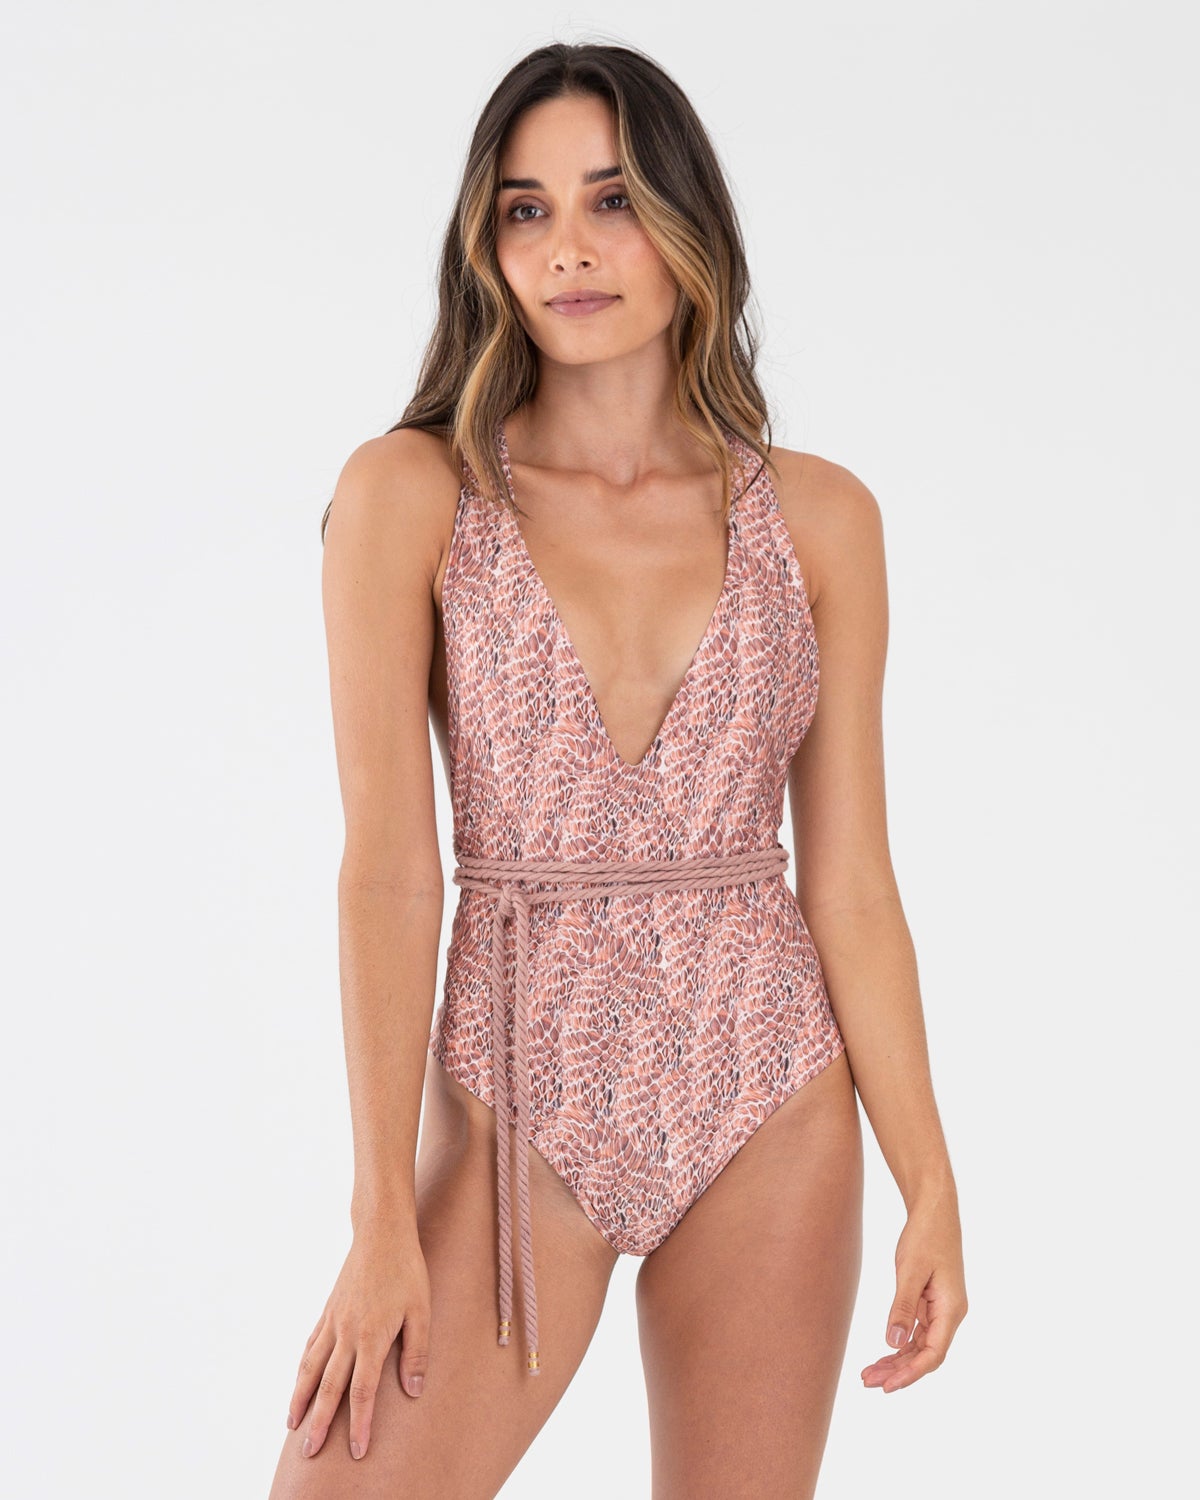 Rose gold colored snake print one piece with plunging neckline and rope tie detail.